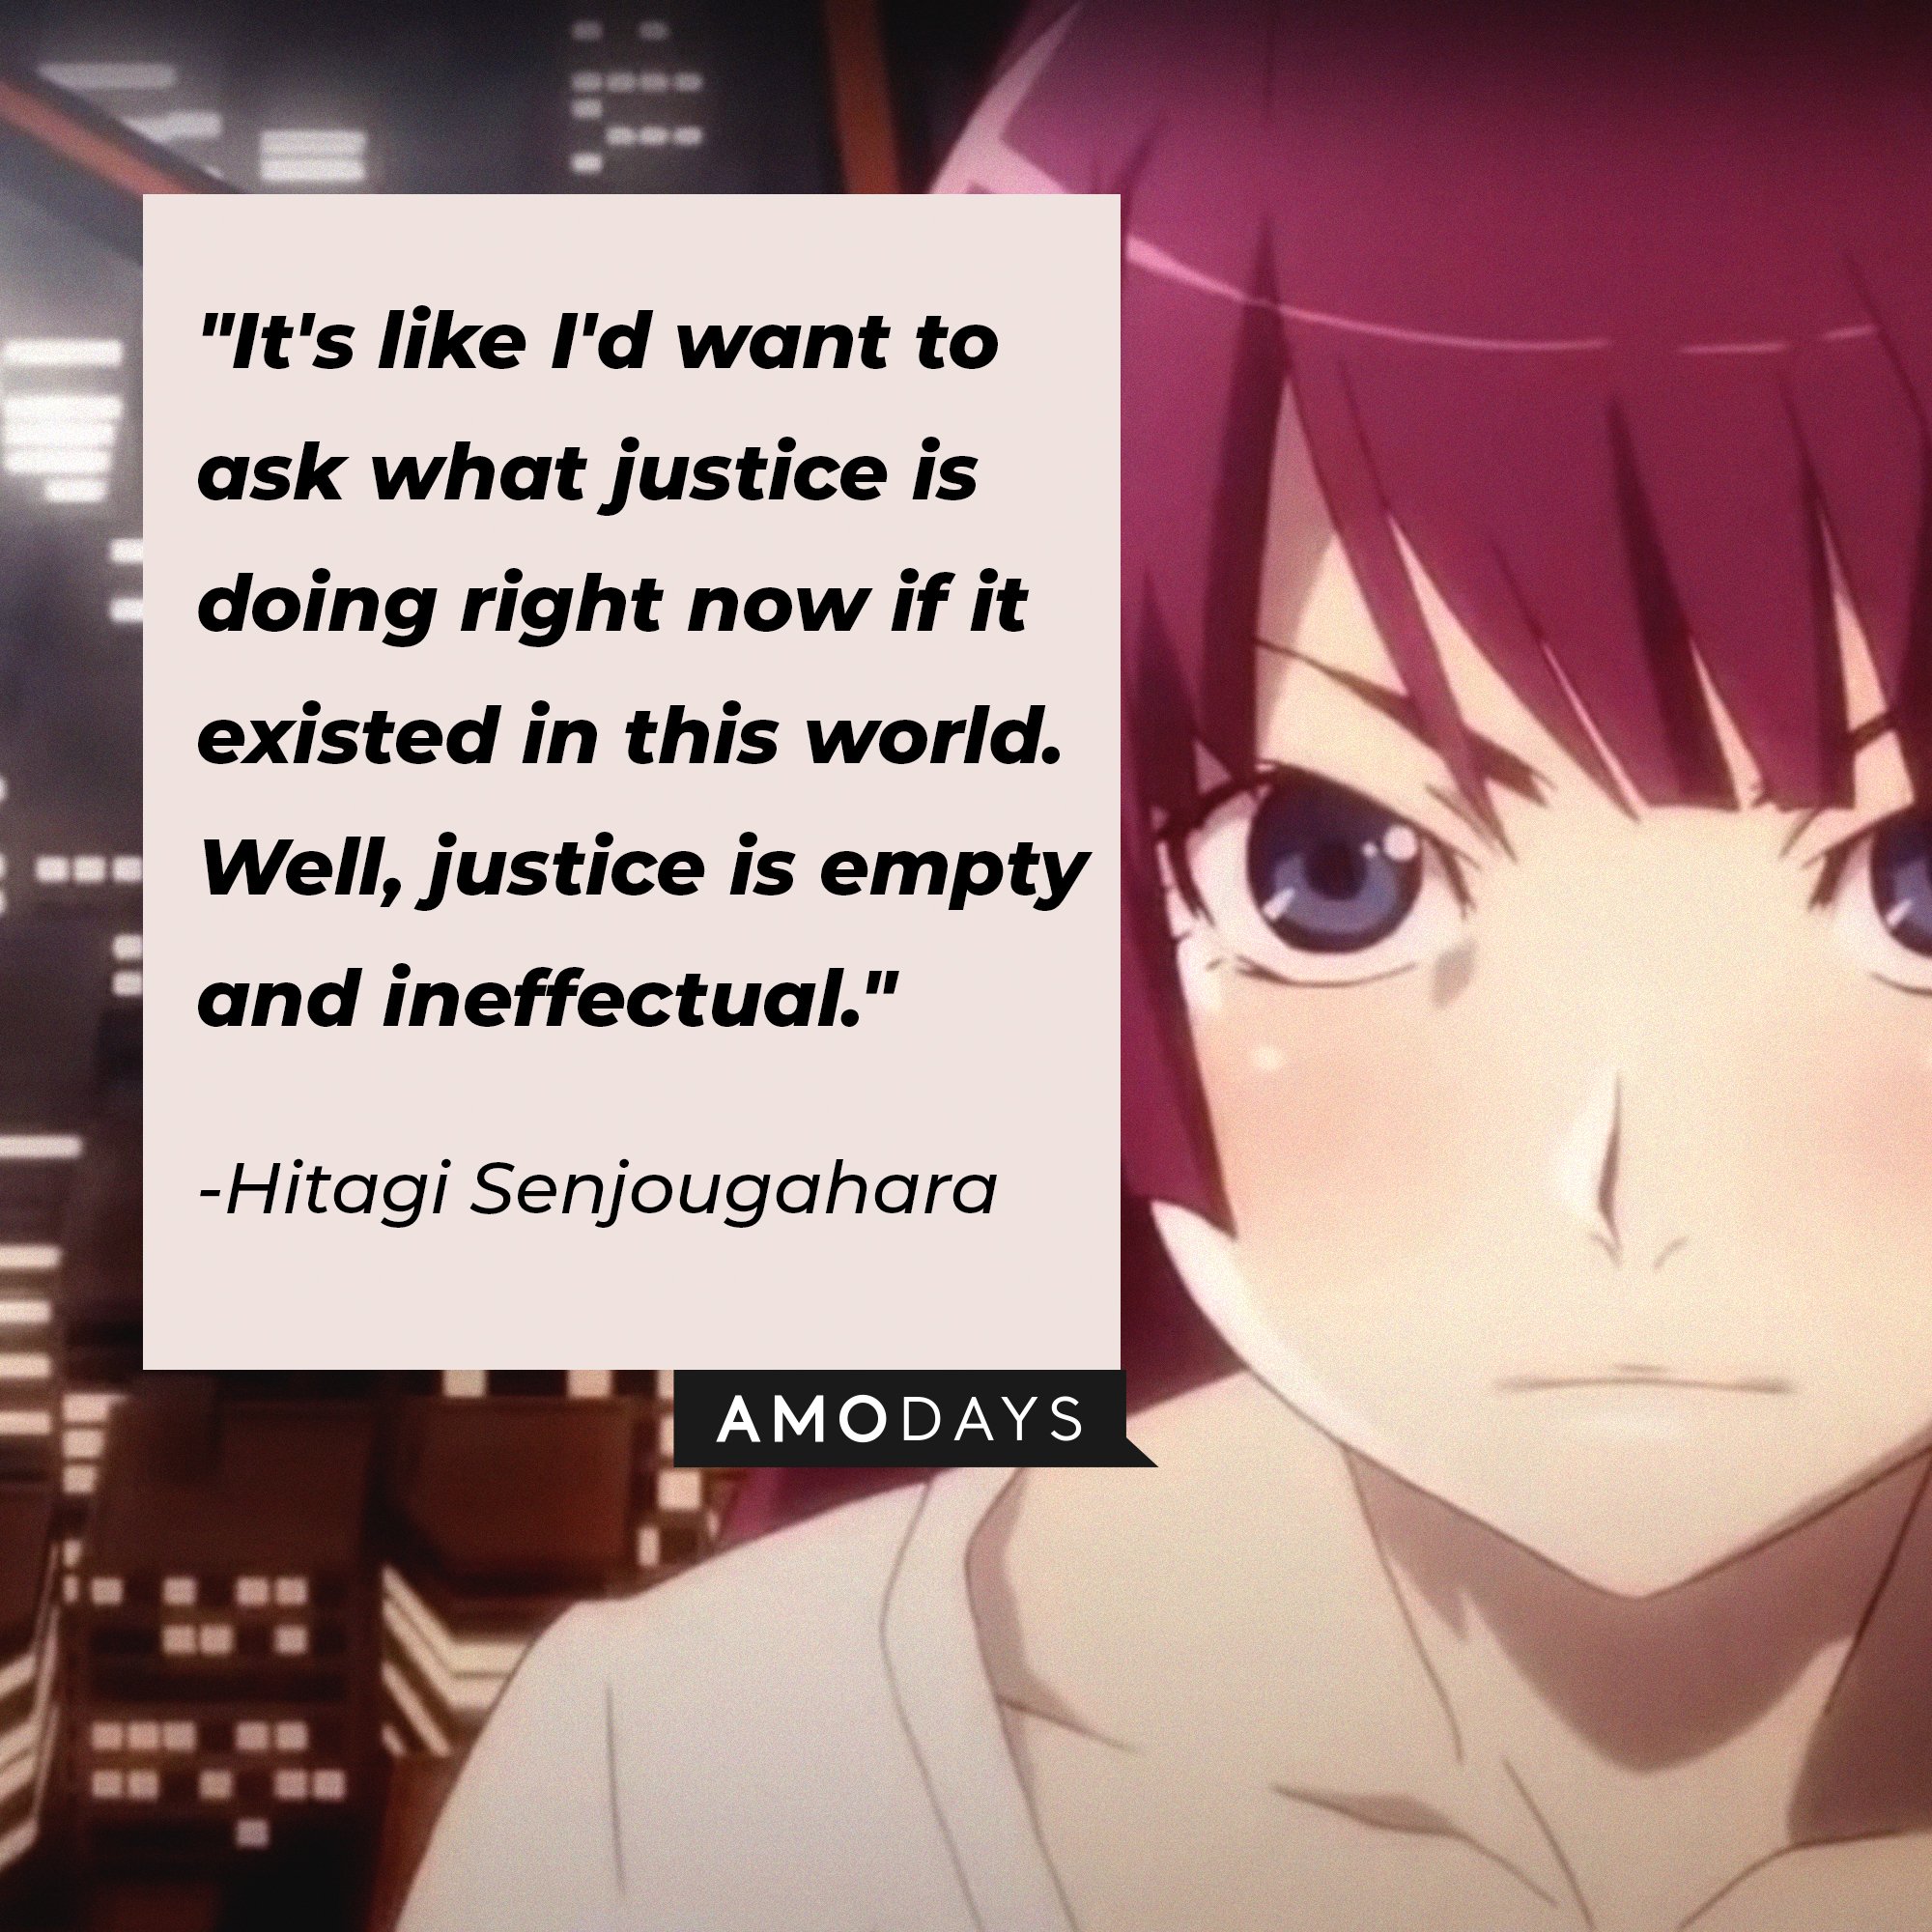 Hitagi Senjougahara’s quote: "It's like I'd want to ask what justice is doing right now if it existed in this world. Well, justice is empty and ineffectual.” | Image: AmoDays 